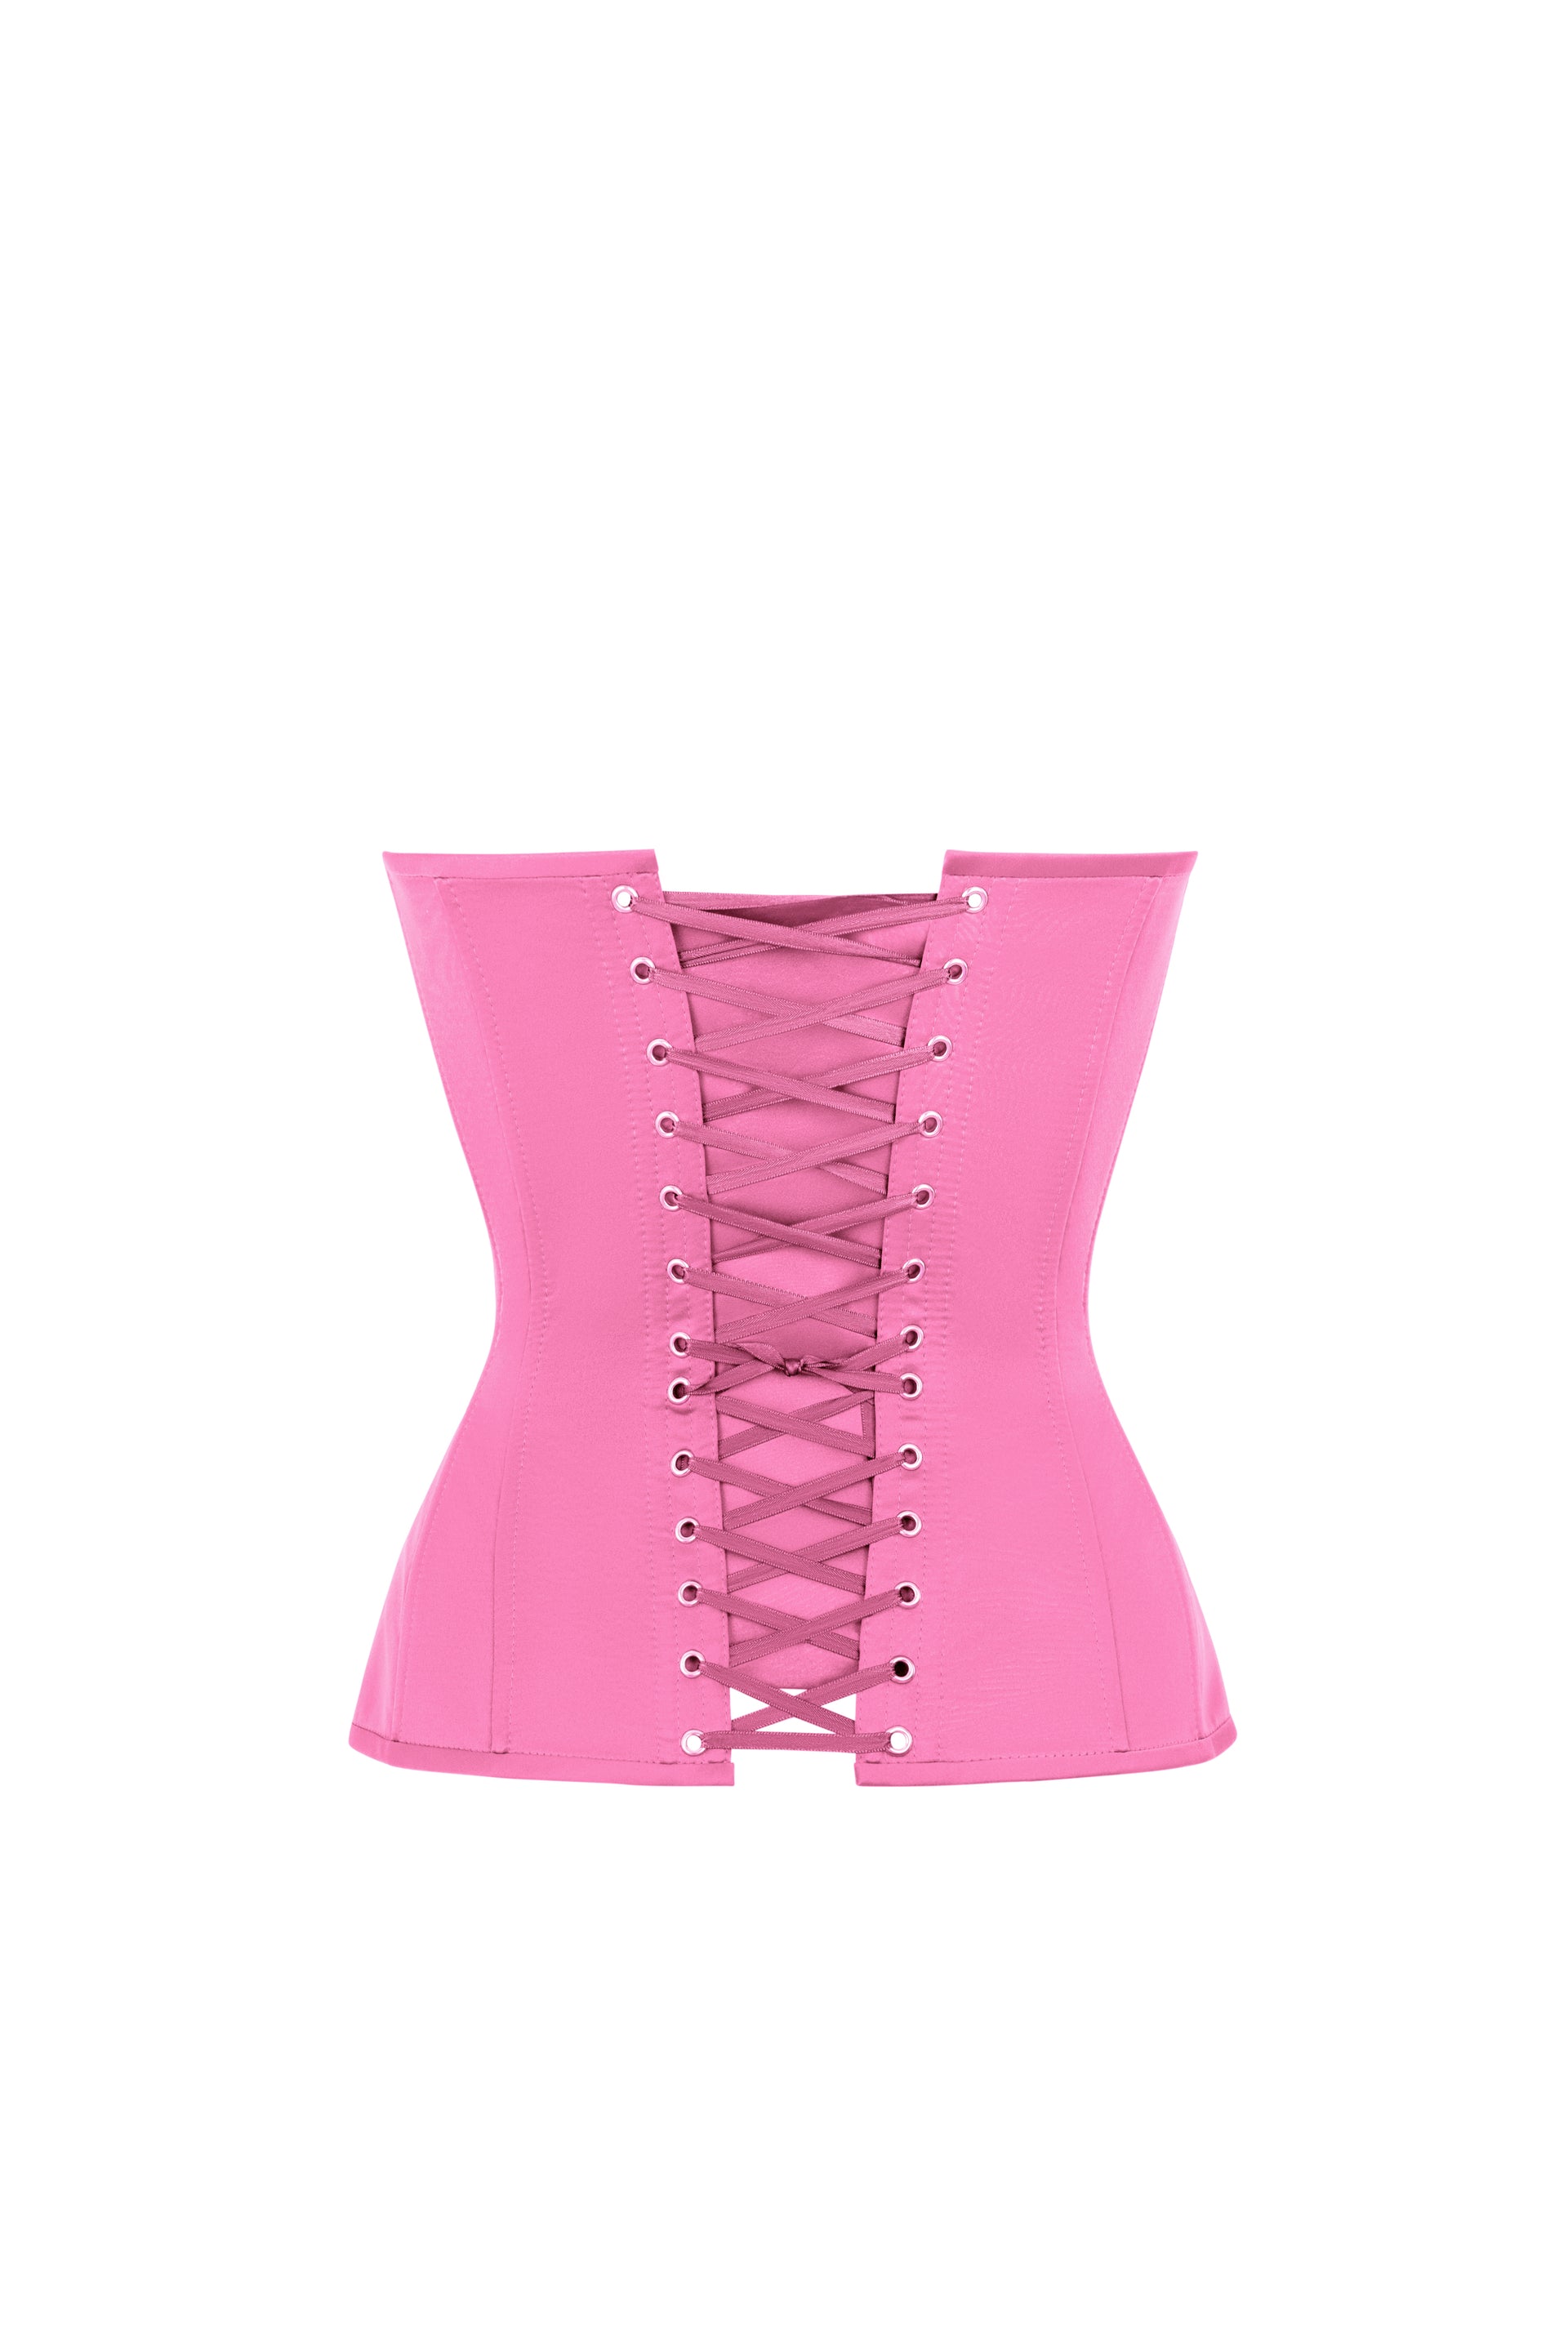 Pink satin corset with cups - STATNAIA